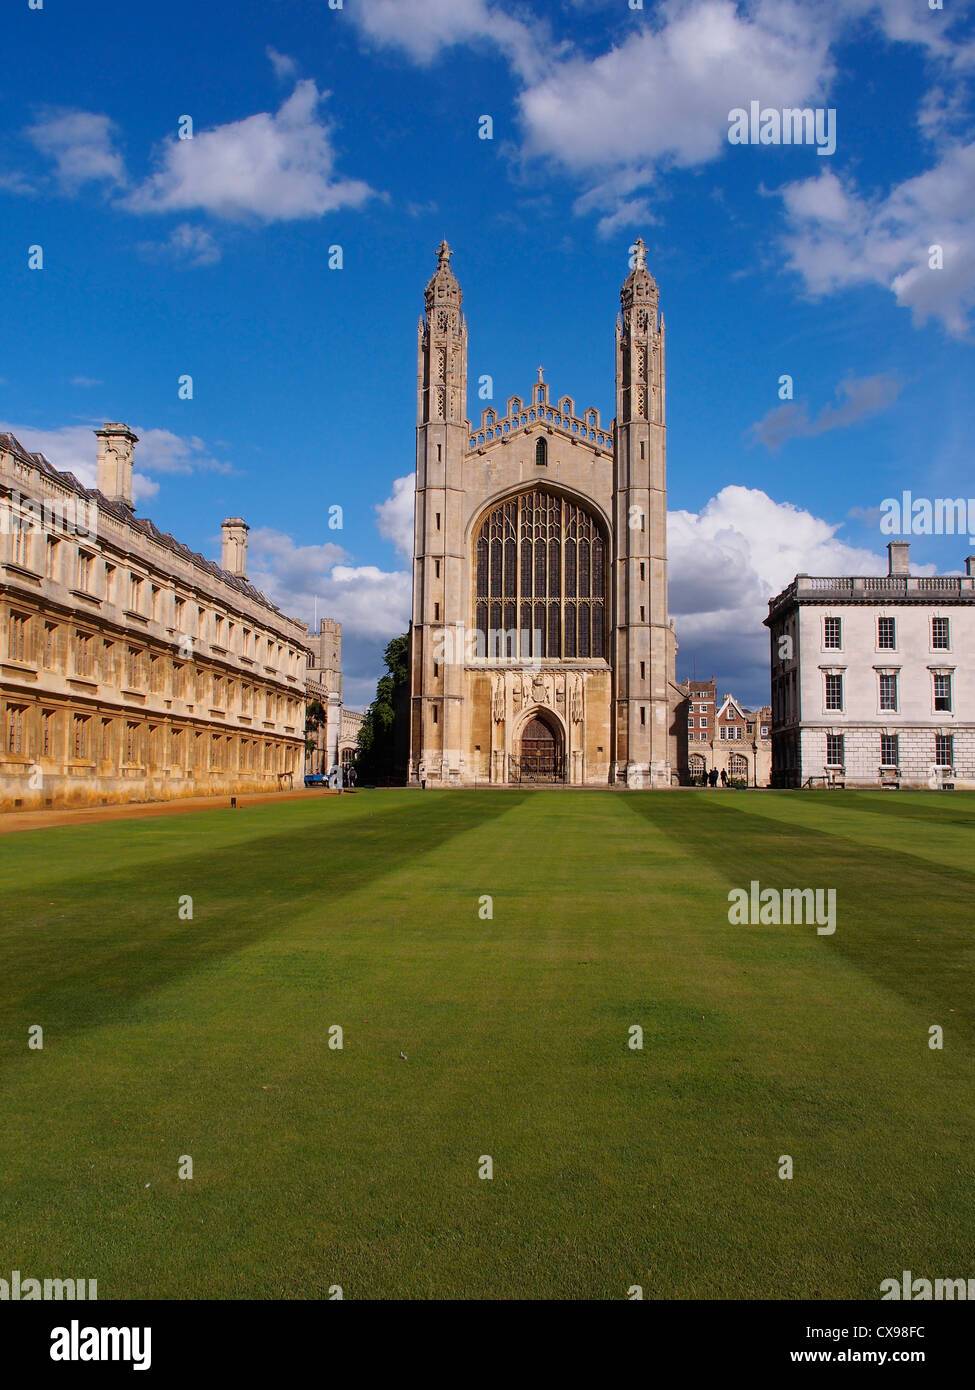 Portrait image of King's College and the Fellows Building in Cambridge University Stock Photo